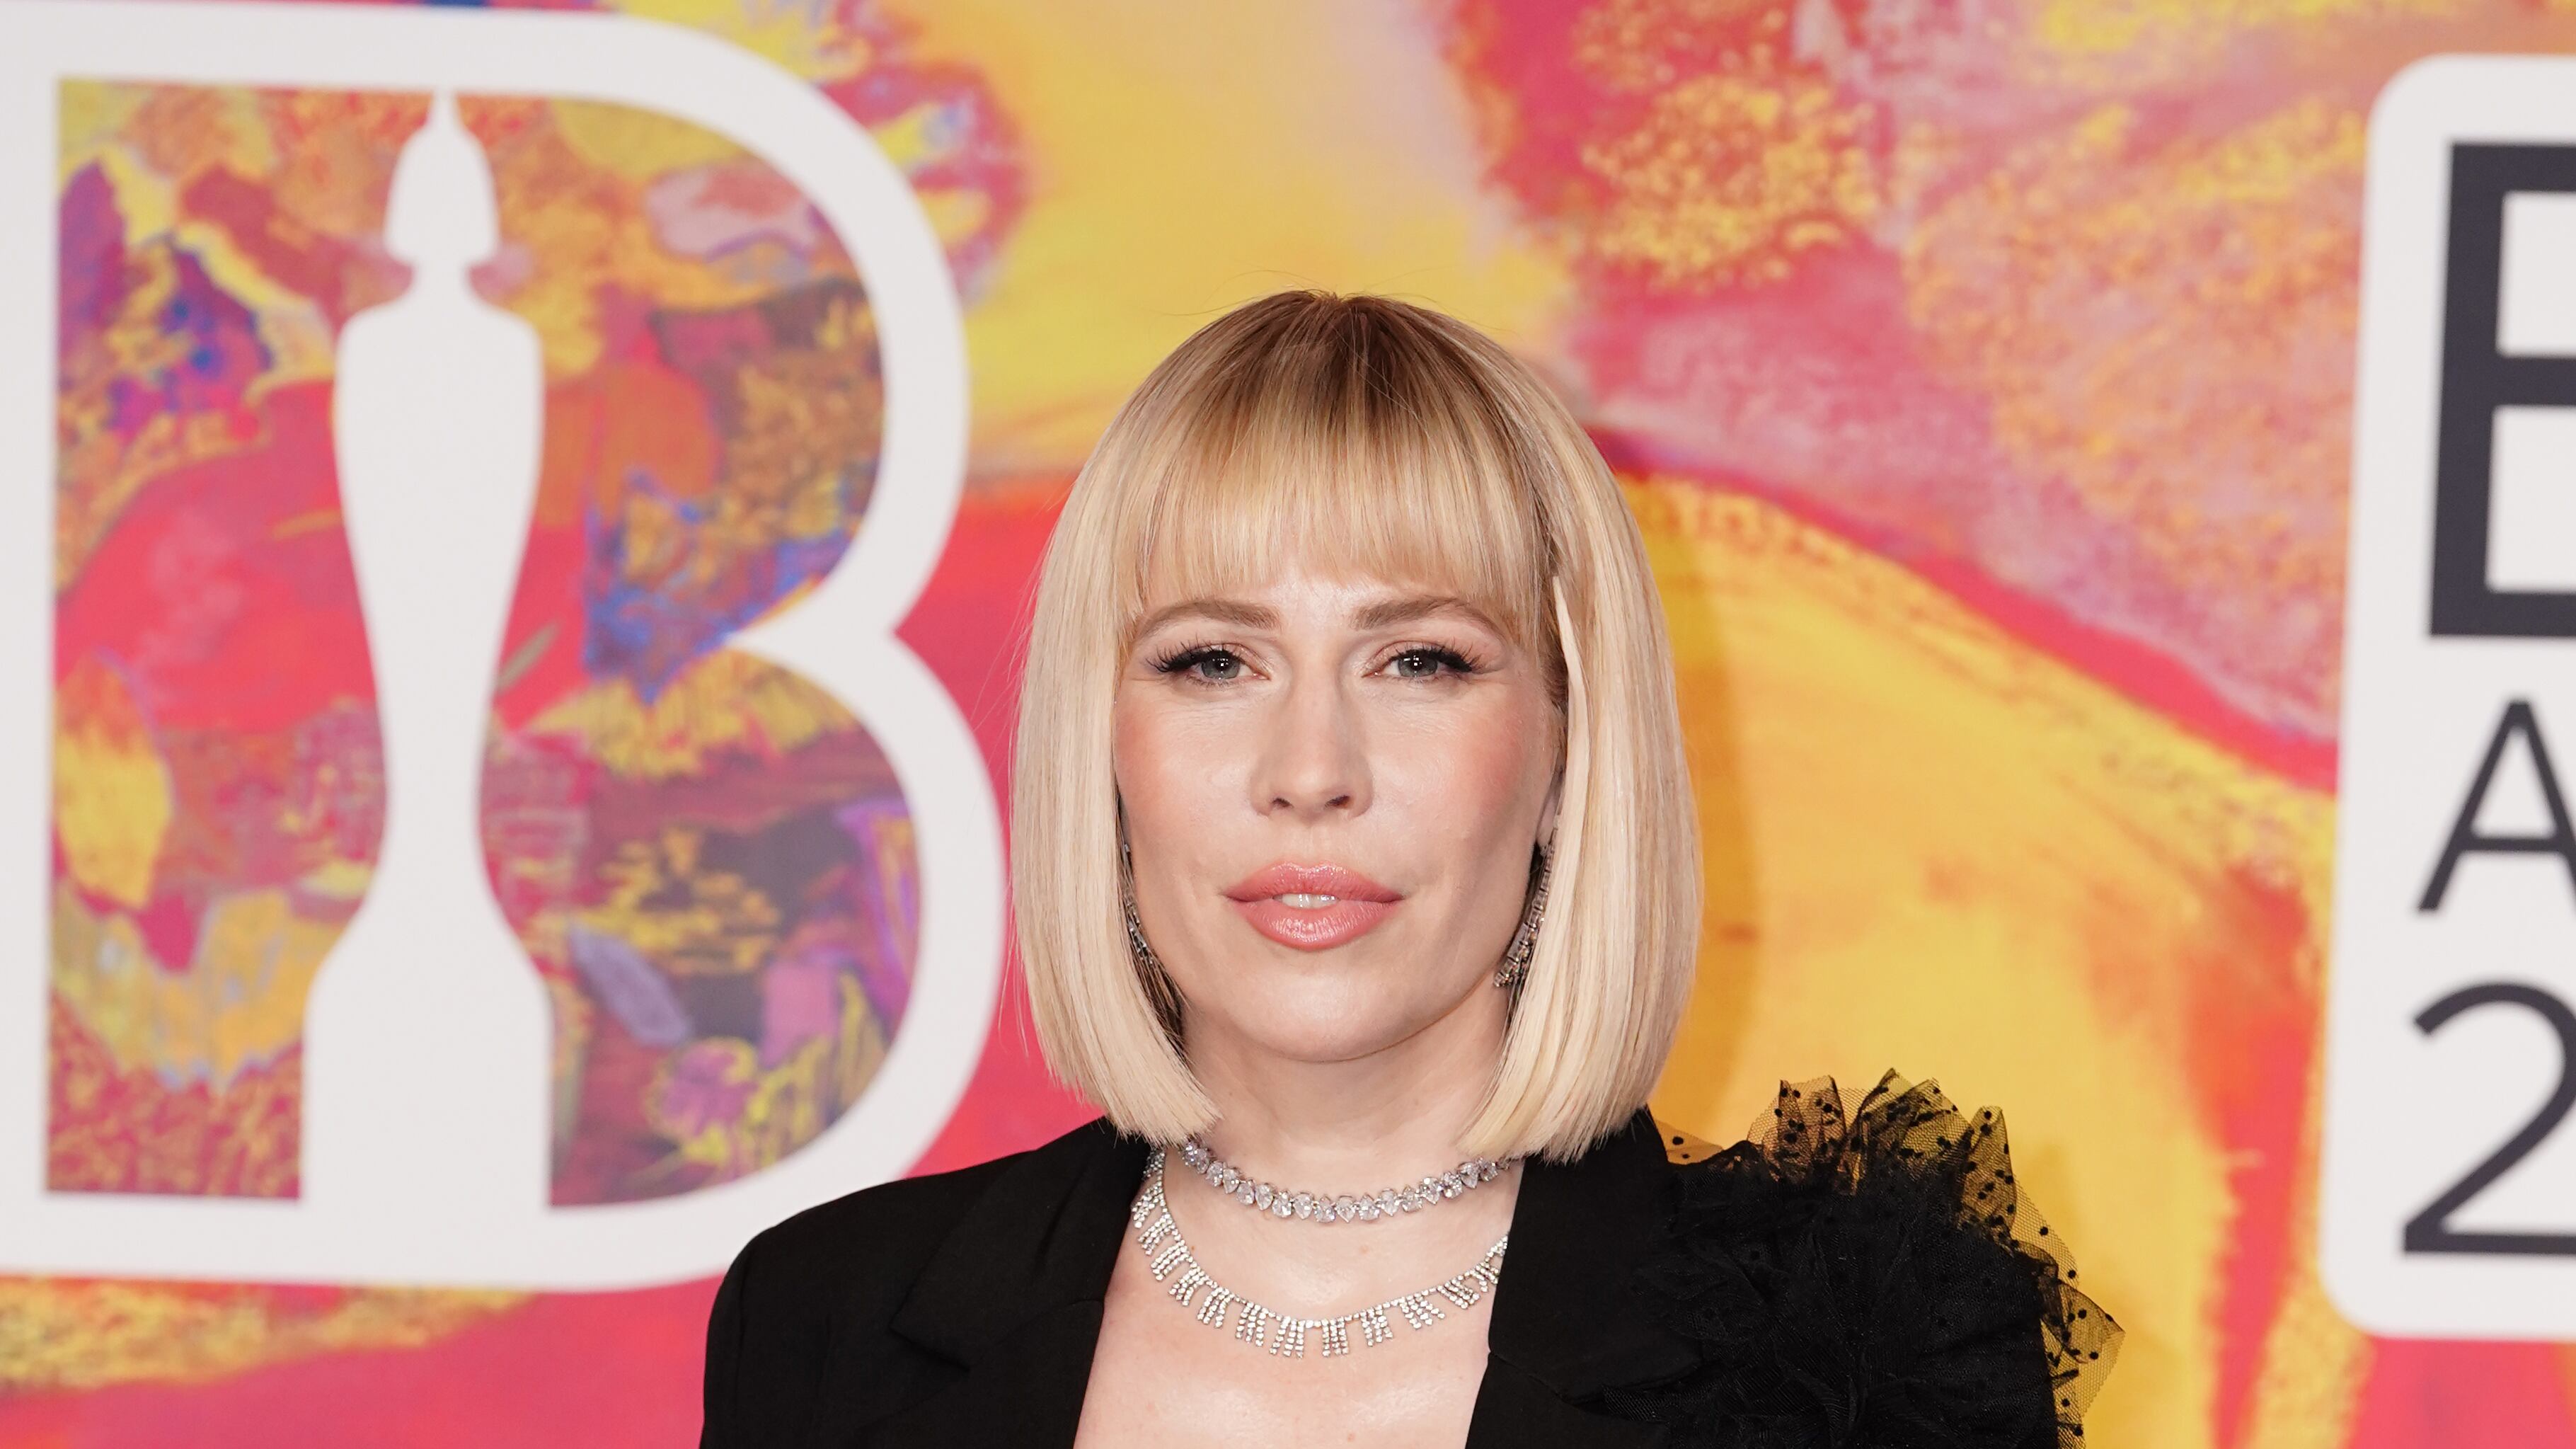 Natasha Bedingfield was not one of the pre-announced acts at Capital’s Summertime Ball